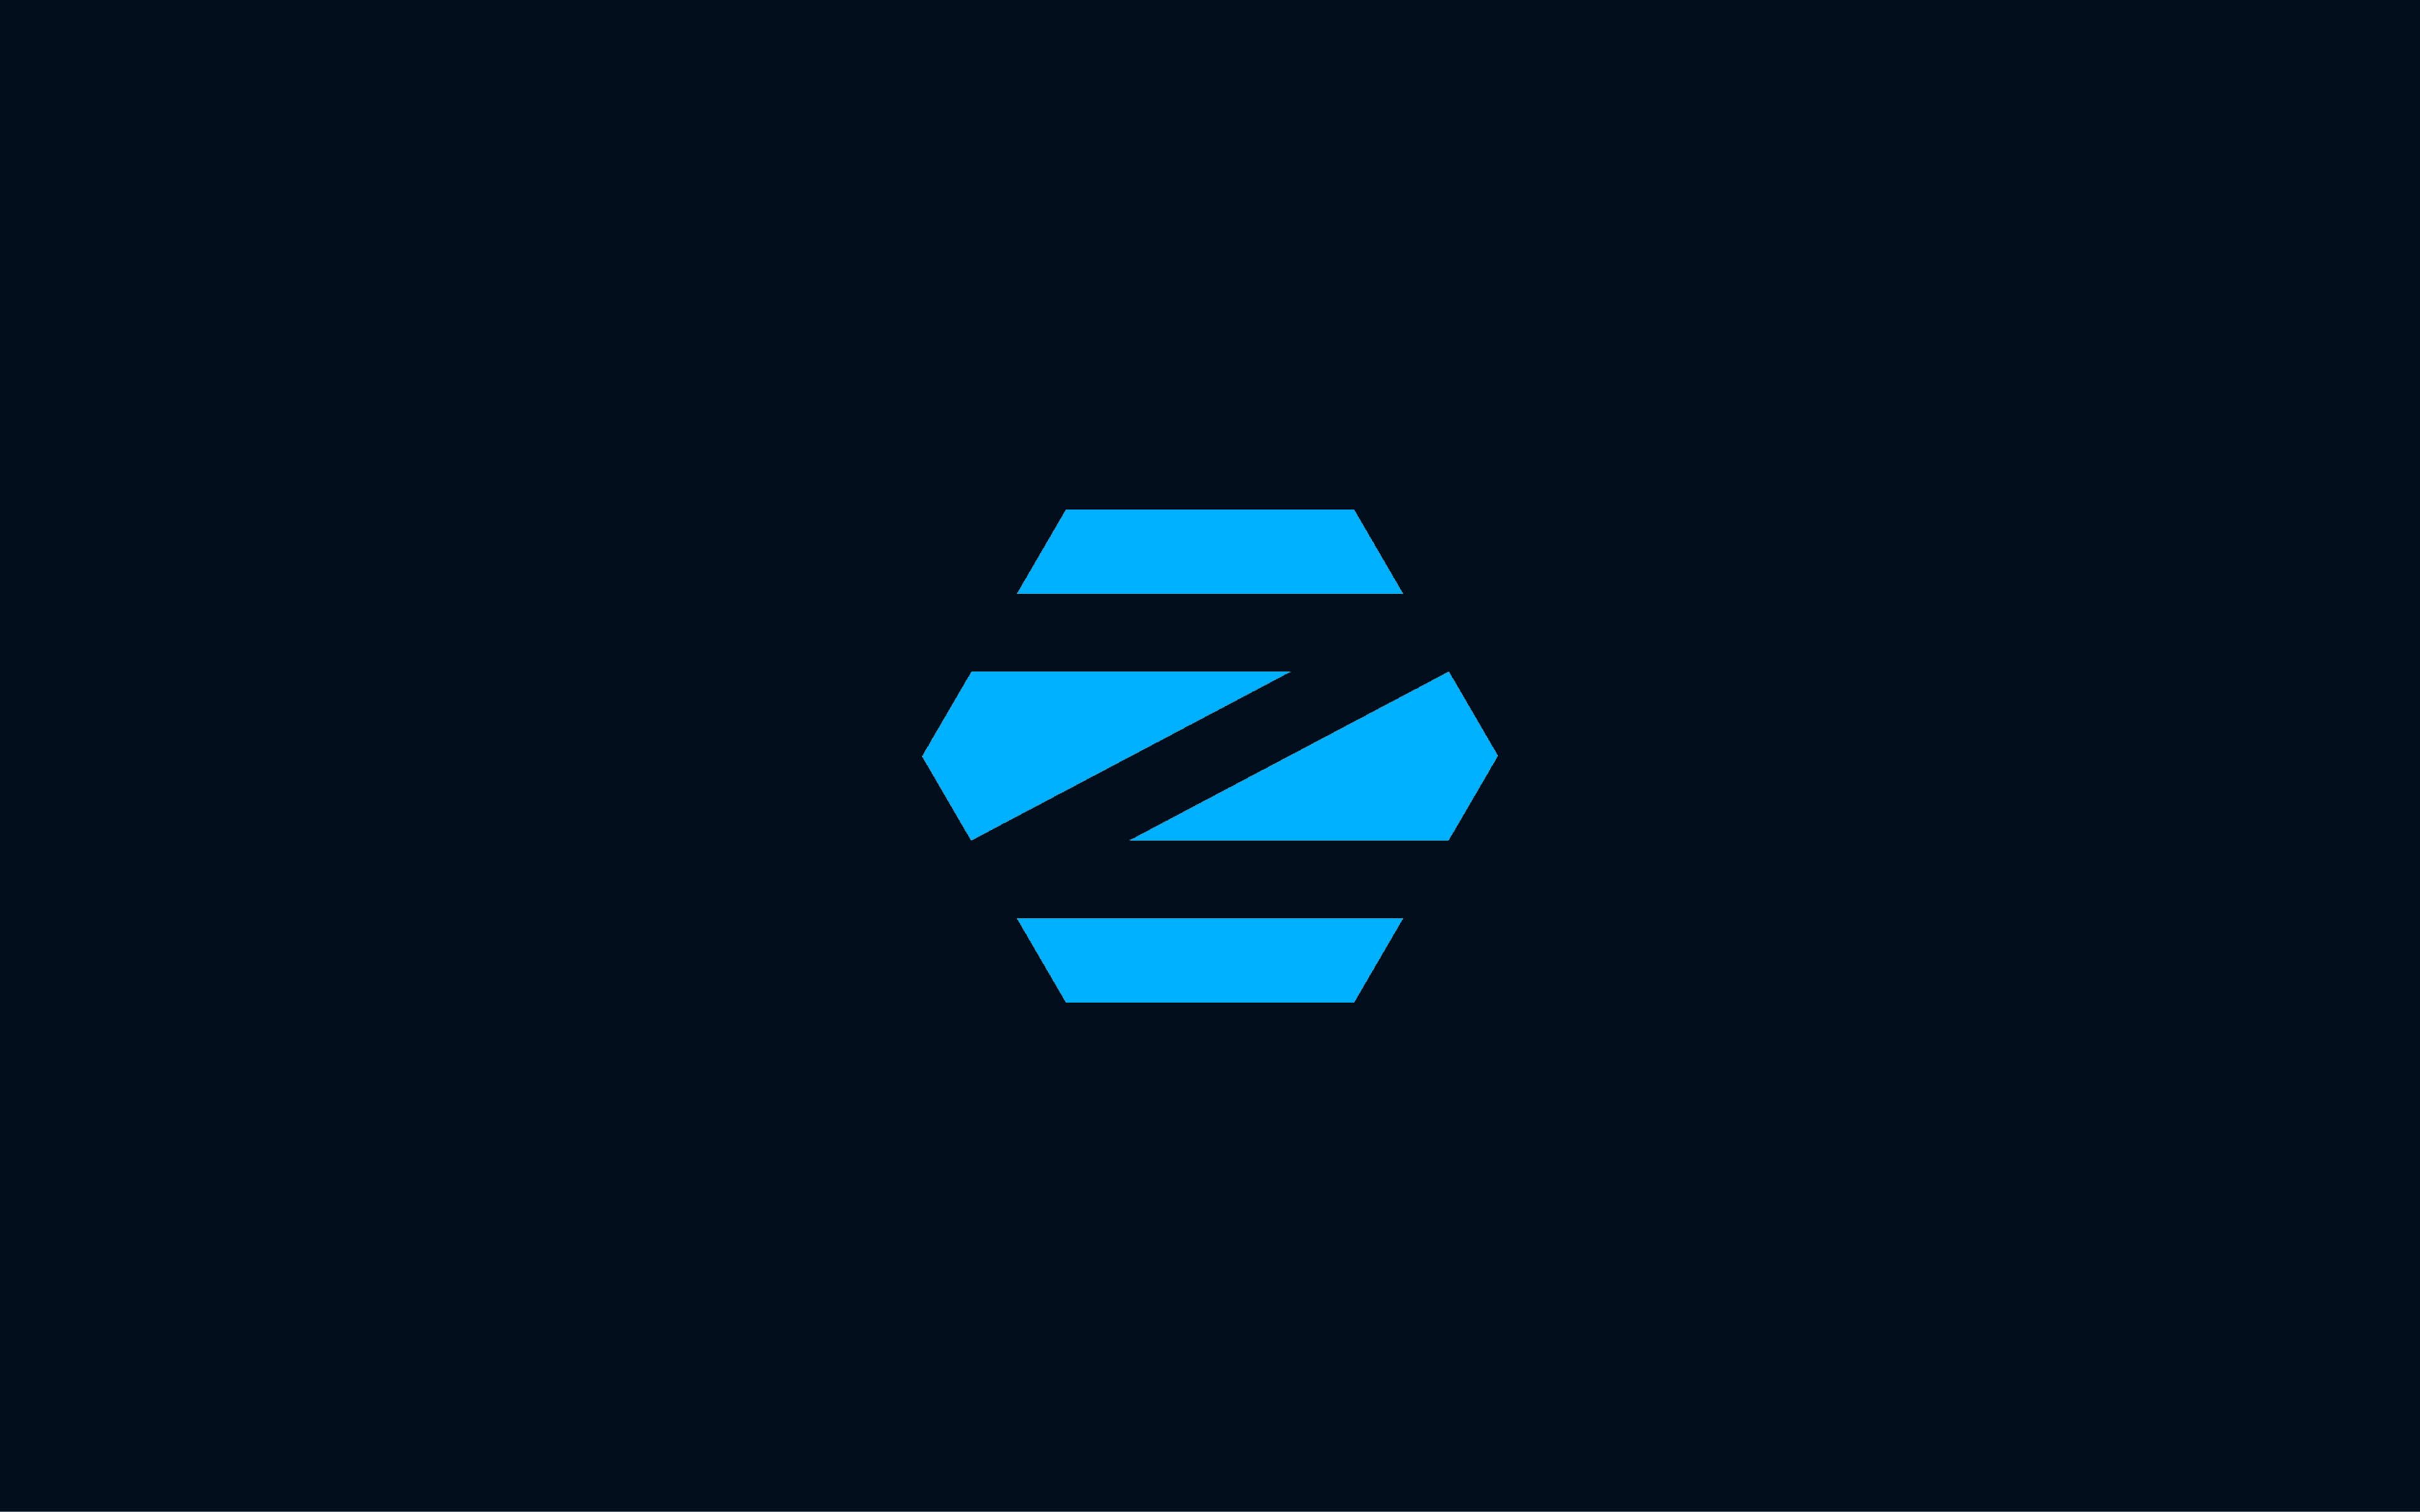 Download wallpaper 4k, Zorin OS blue logo, minimalism, Zorin OS logo, Linux, blue background, Zorin OS for desktop with resolution 3840x2400. High Quality HD picture wallpaper